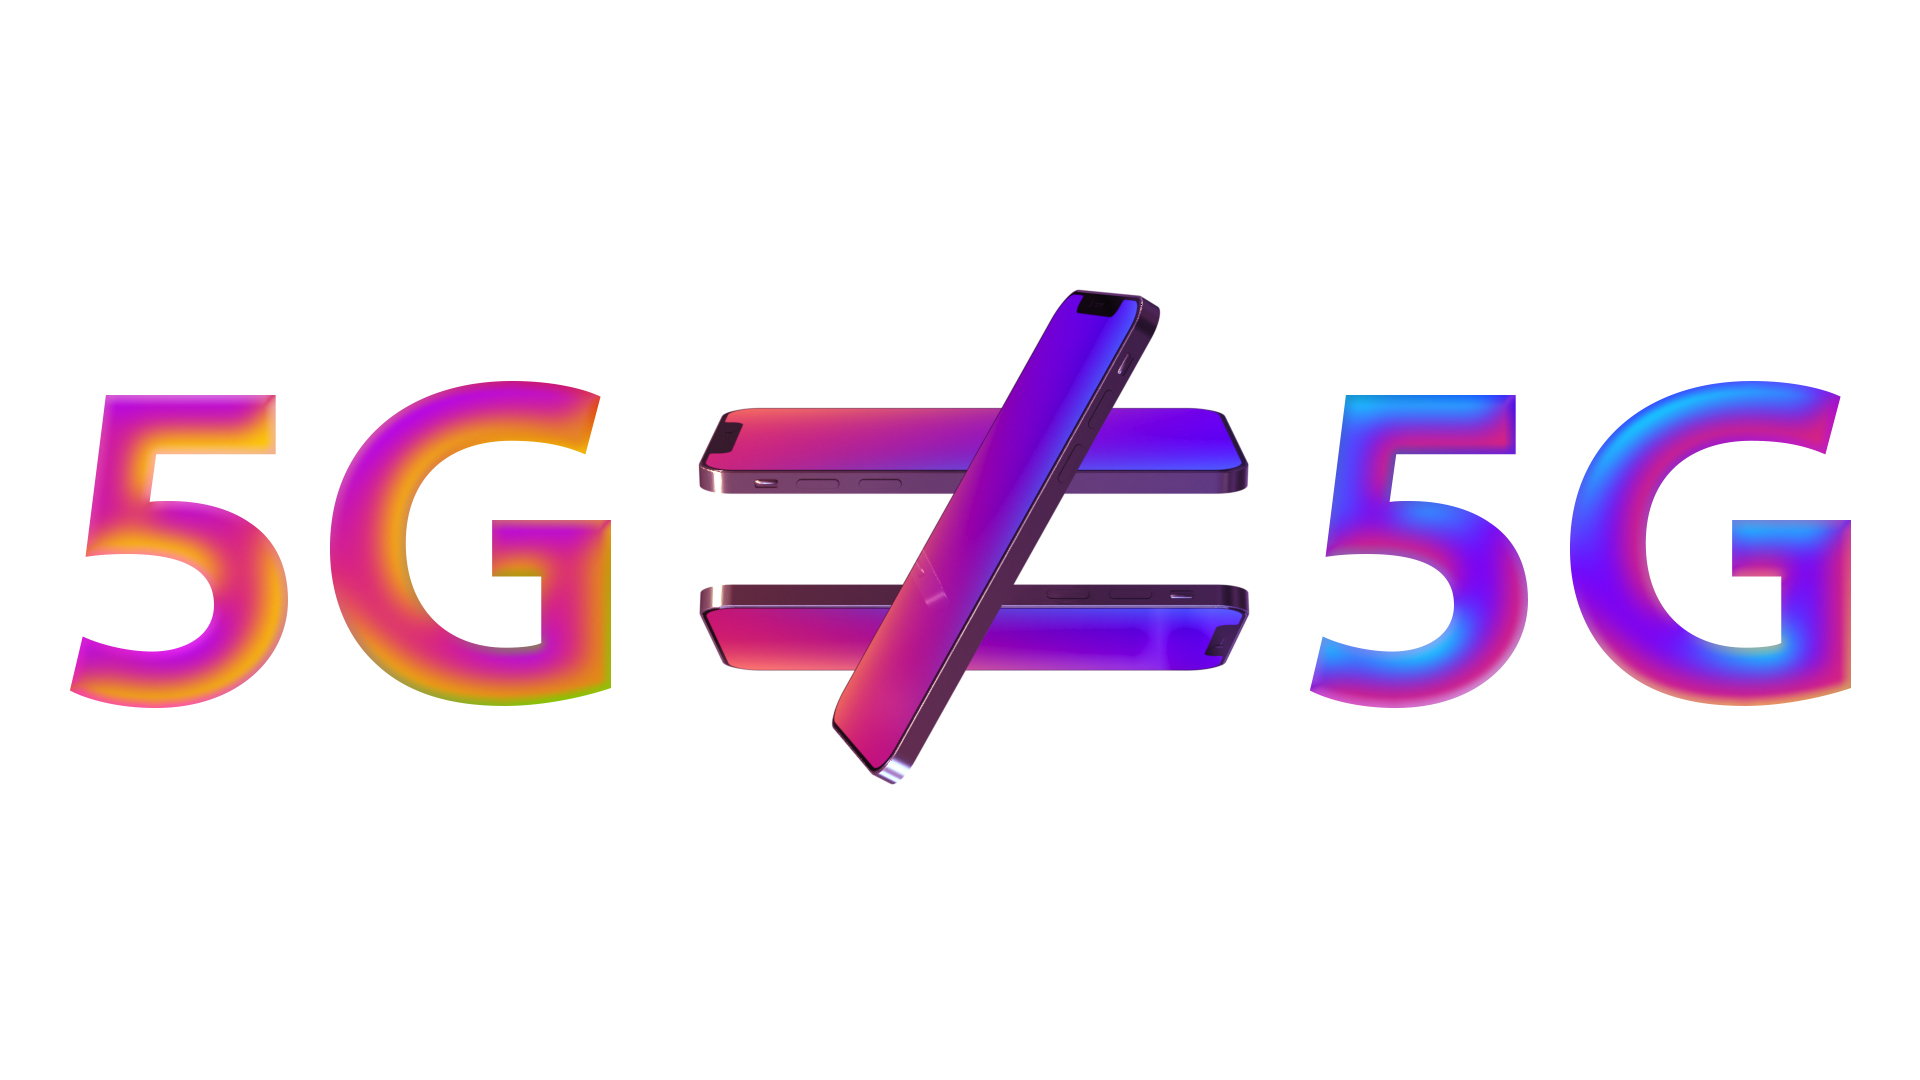 5Gnot5G-Feature-2.jpg